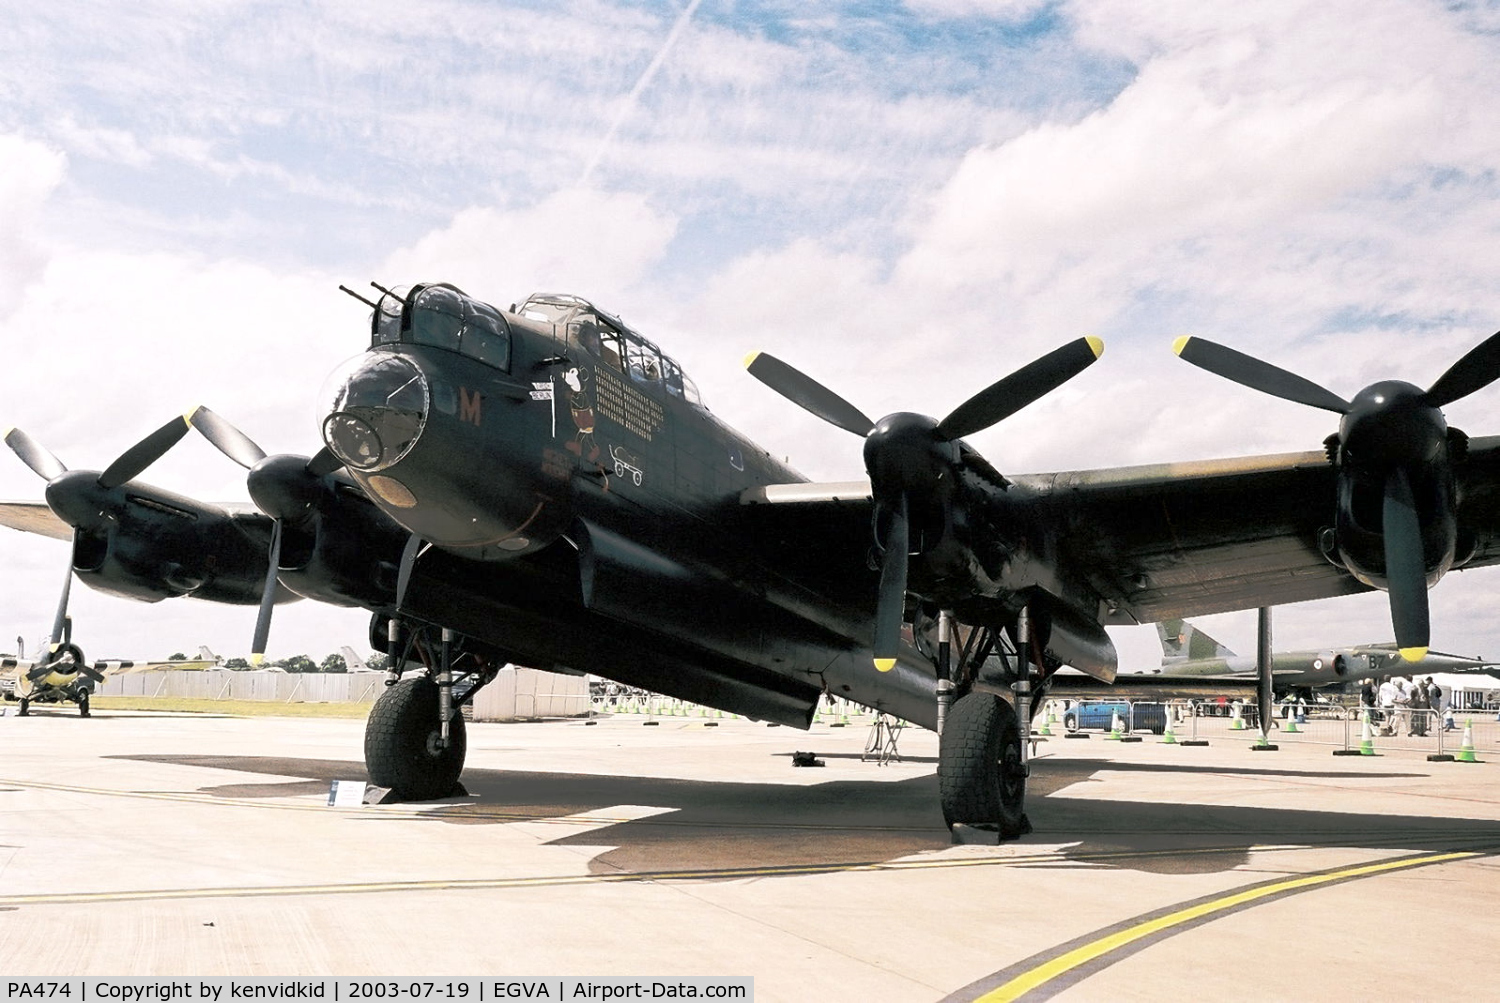 PA474, 1945 Avro 683 Lancaster B1 C/N VACH0052/D2973, In the 100 Years of Flight enclave at RIAT.